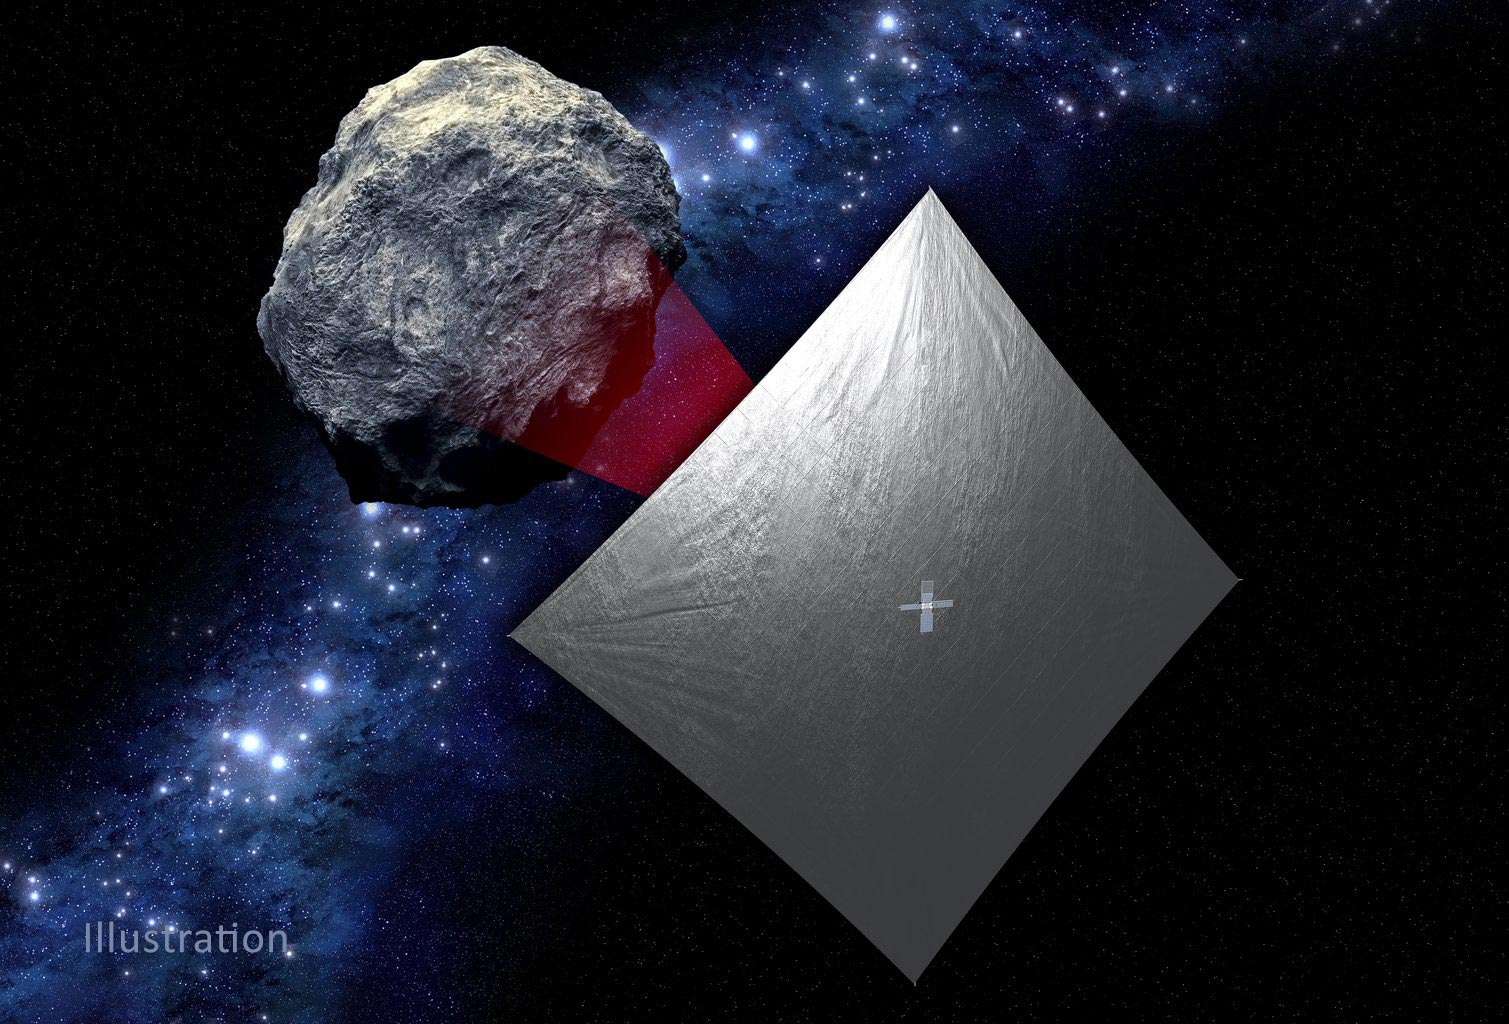 NASA Solar Sail Spacecraft to Chase Tiny Asteroid After Artemis I Launch - SciTechDaily